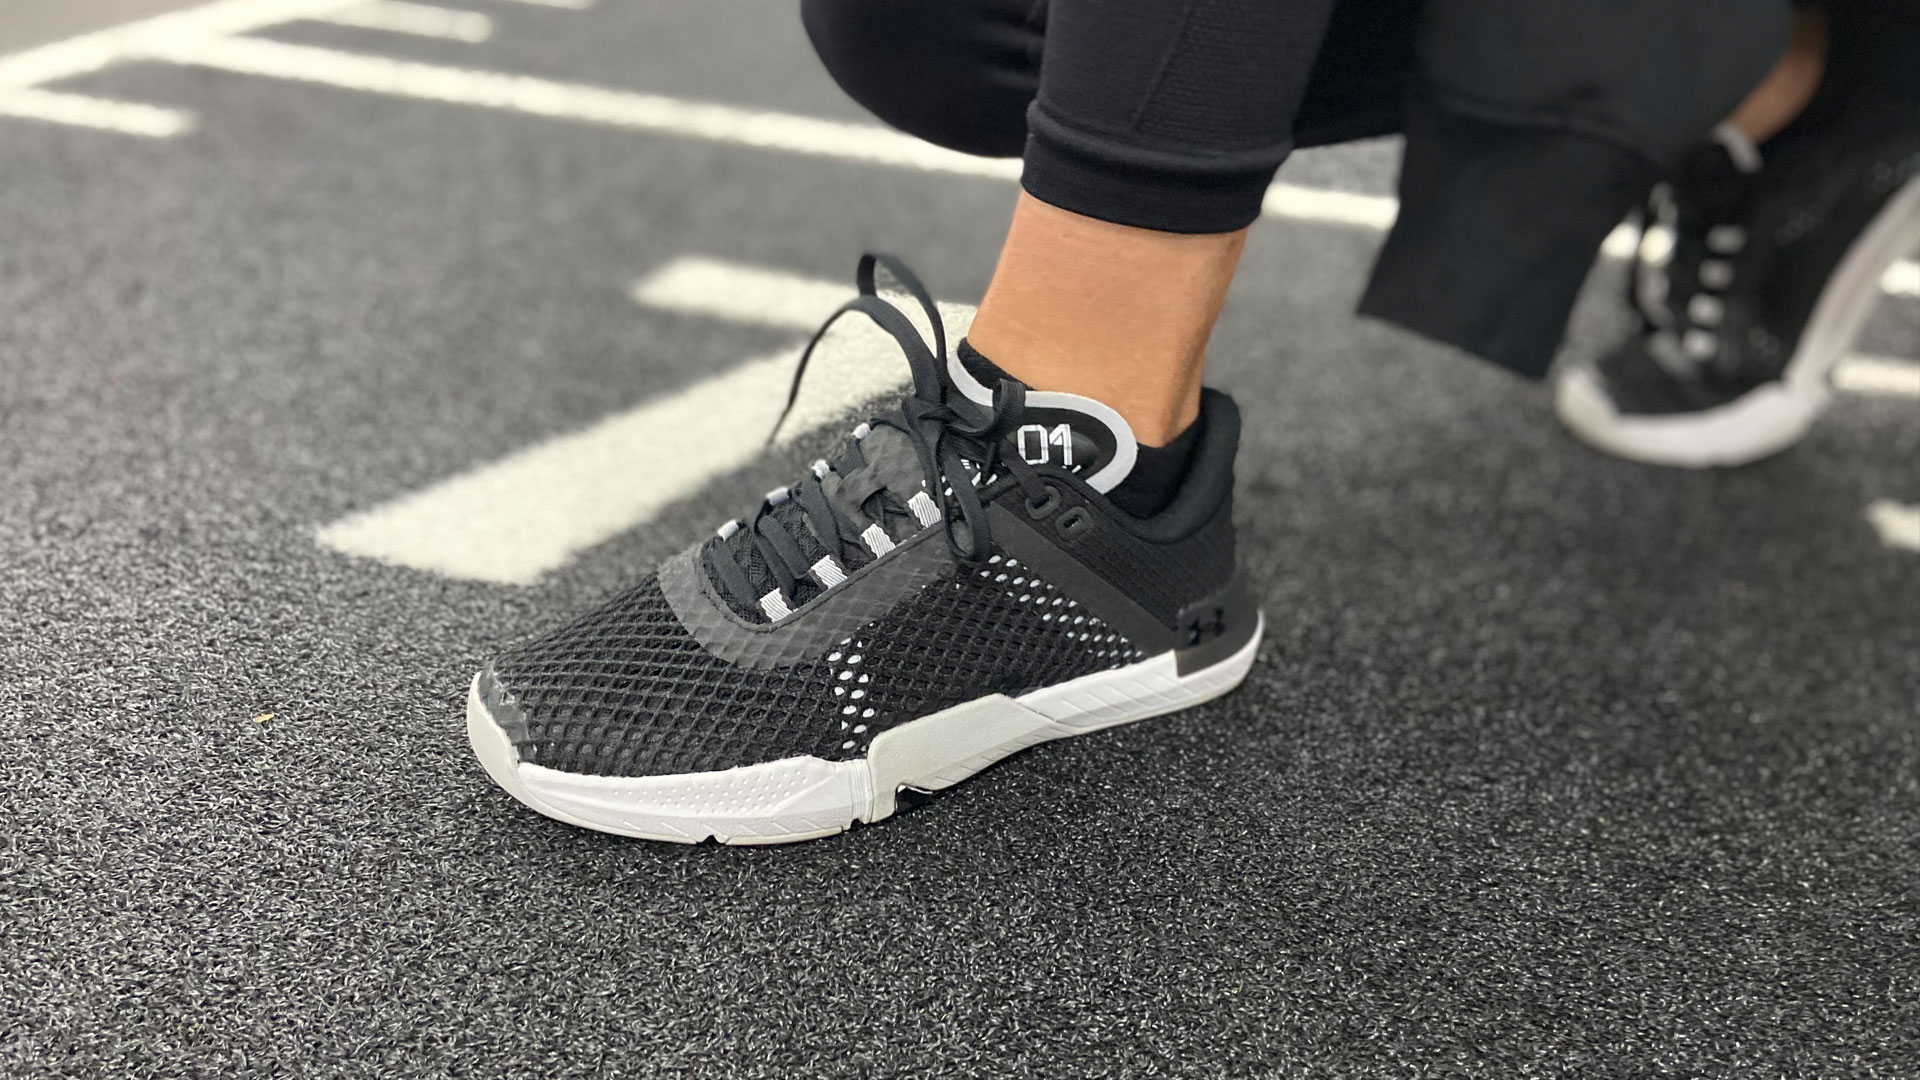 Under Armour TriBase Reign 4 shoes review | Fit&Well